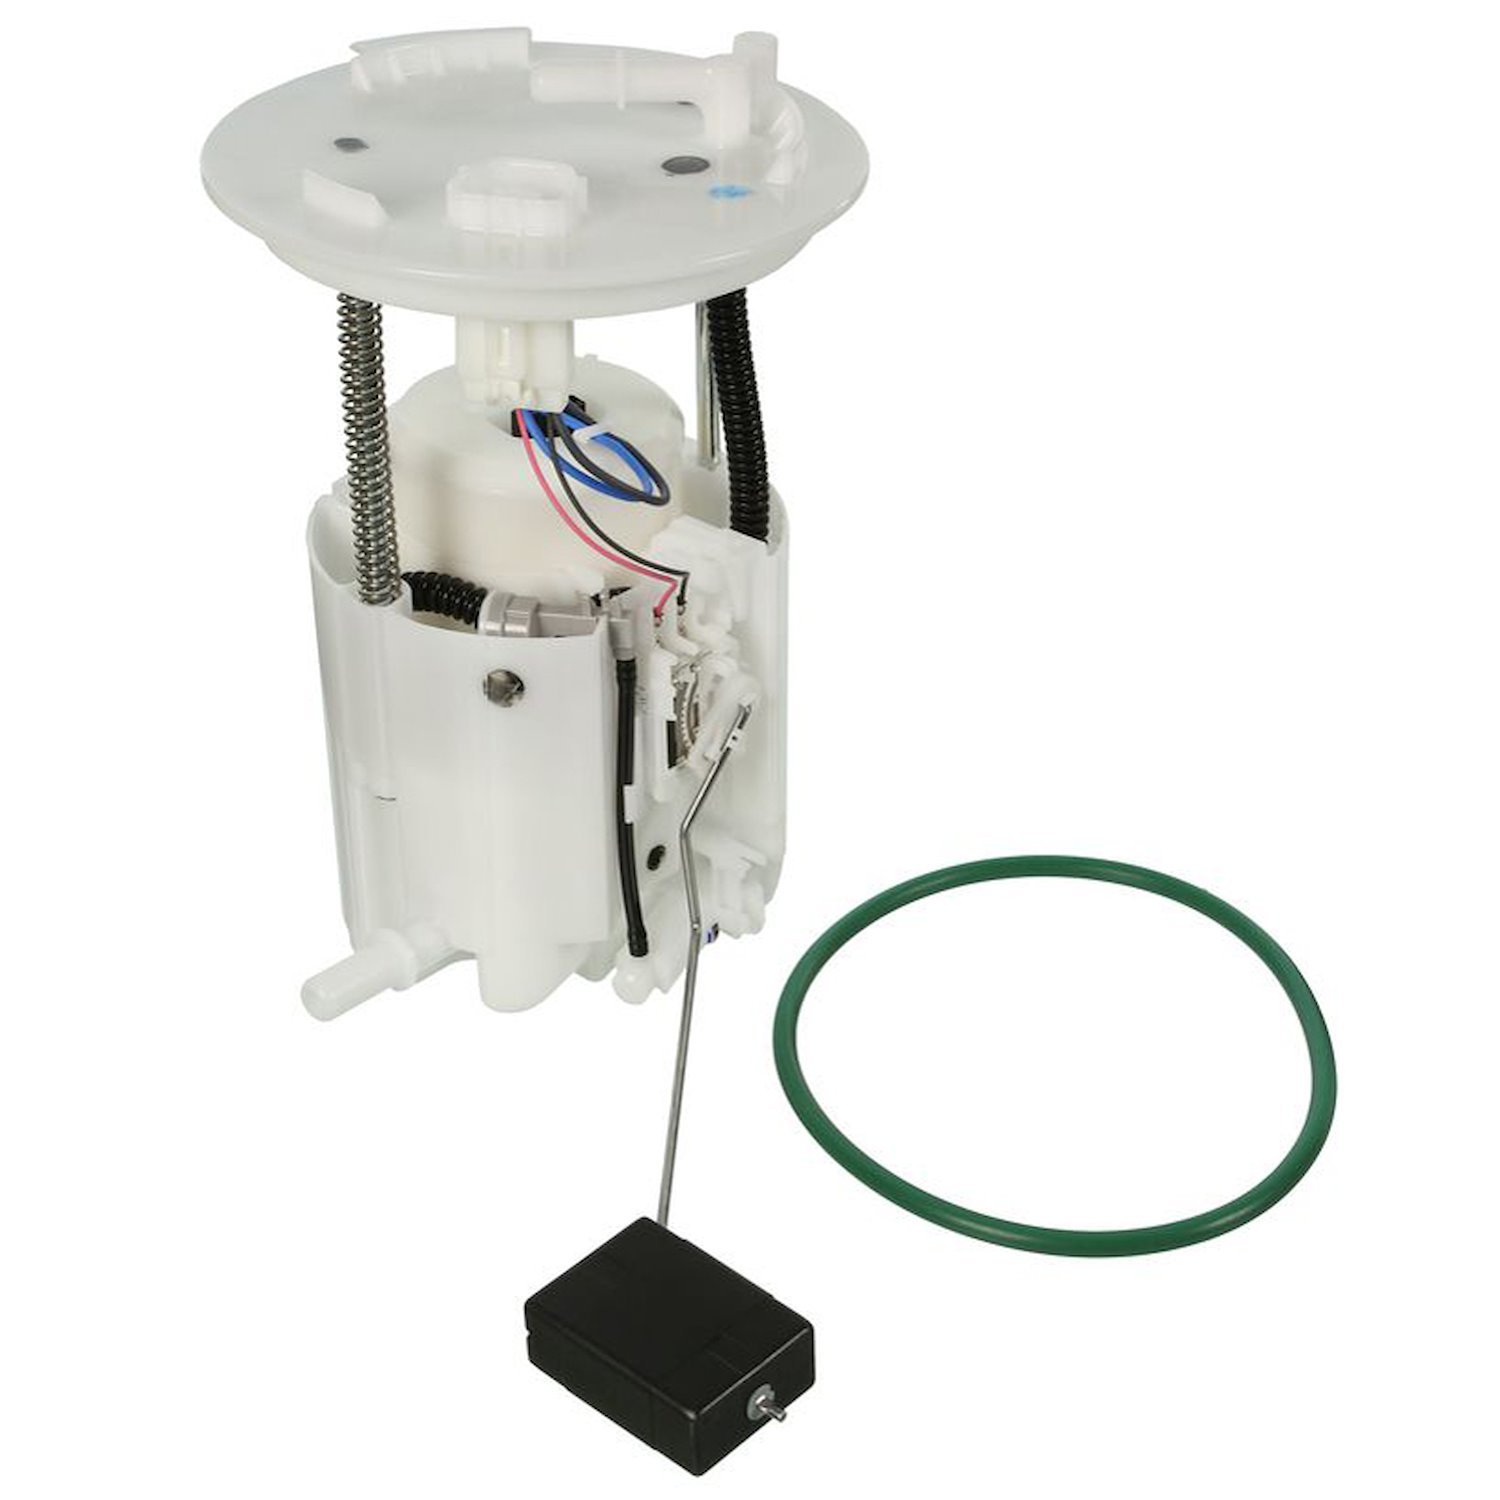 OE Ford/Lincoln Replacement Fuel Pump Module Assembly for 2010-2012 Ford Fusion/Lincoln MKZ